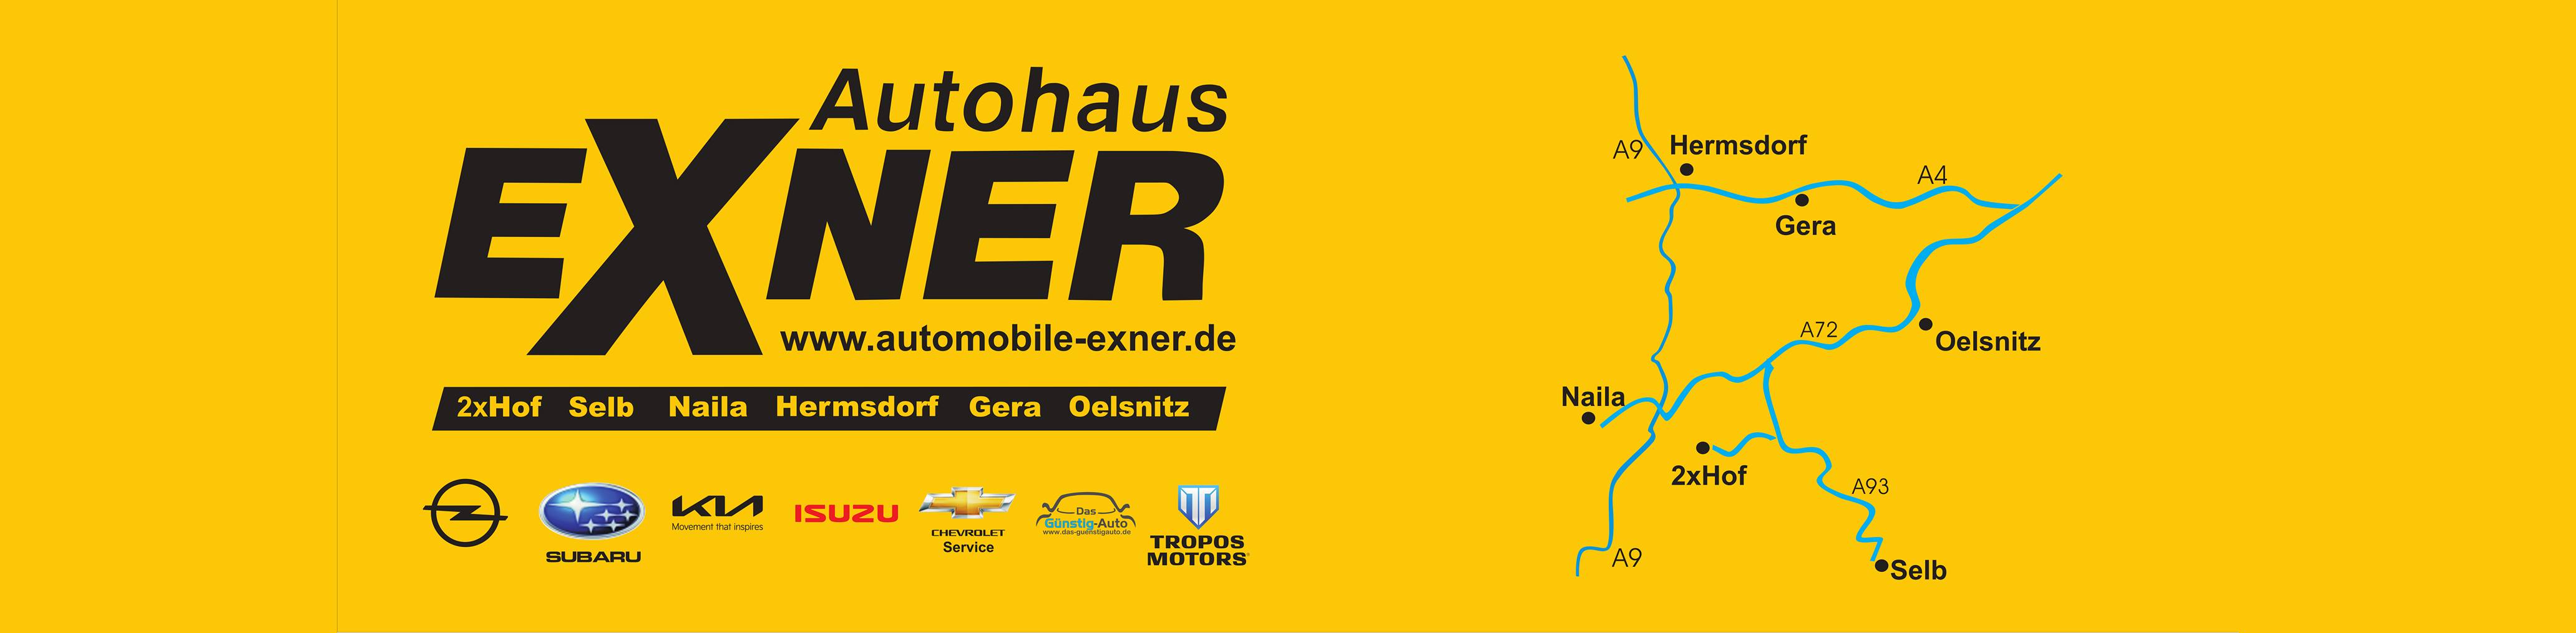 Autohaus Exner GmbH & Co. KG